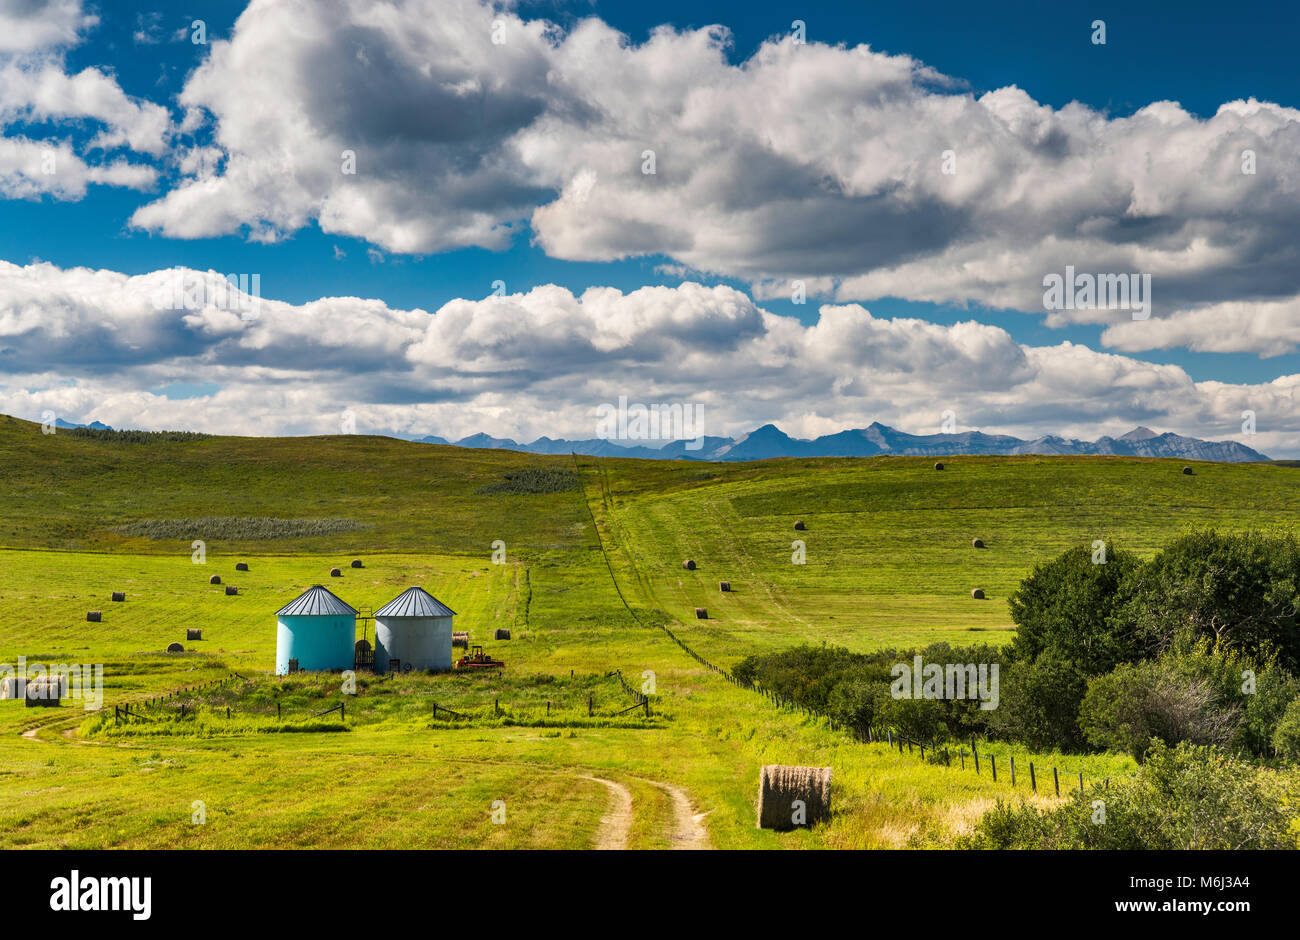 Small silos, bales of hay at ranch in rolling foothills of the Rocky Mountains, visible in far distance, near Longview, Alberta, Canada Stock Photo